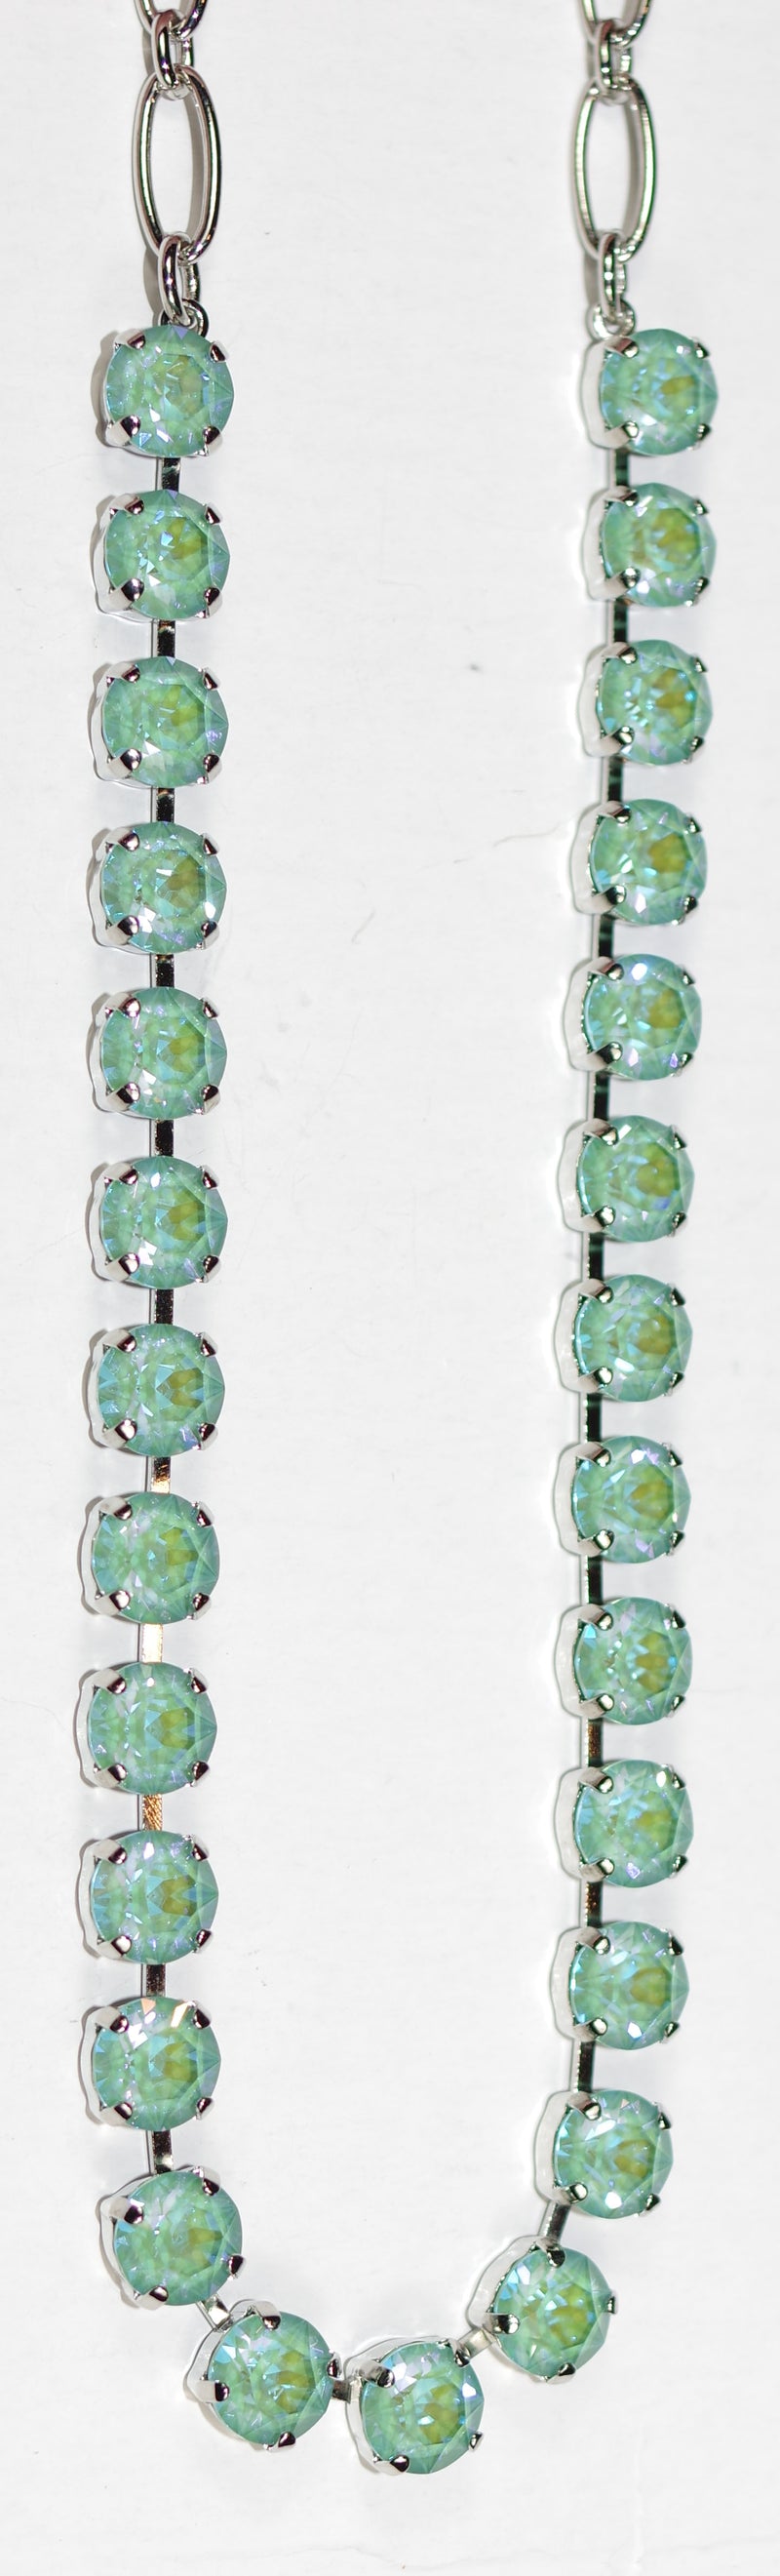 MARIANA NECKLACE BETTE SUN KISSED: blue/green 1/4" stones in silver rhodium setting, 17" adjustable chain